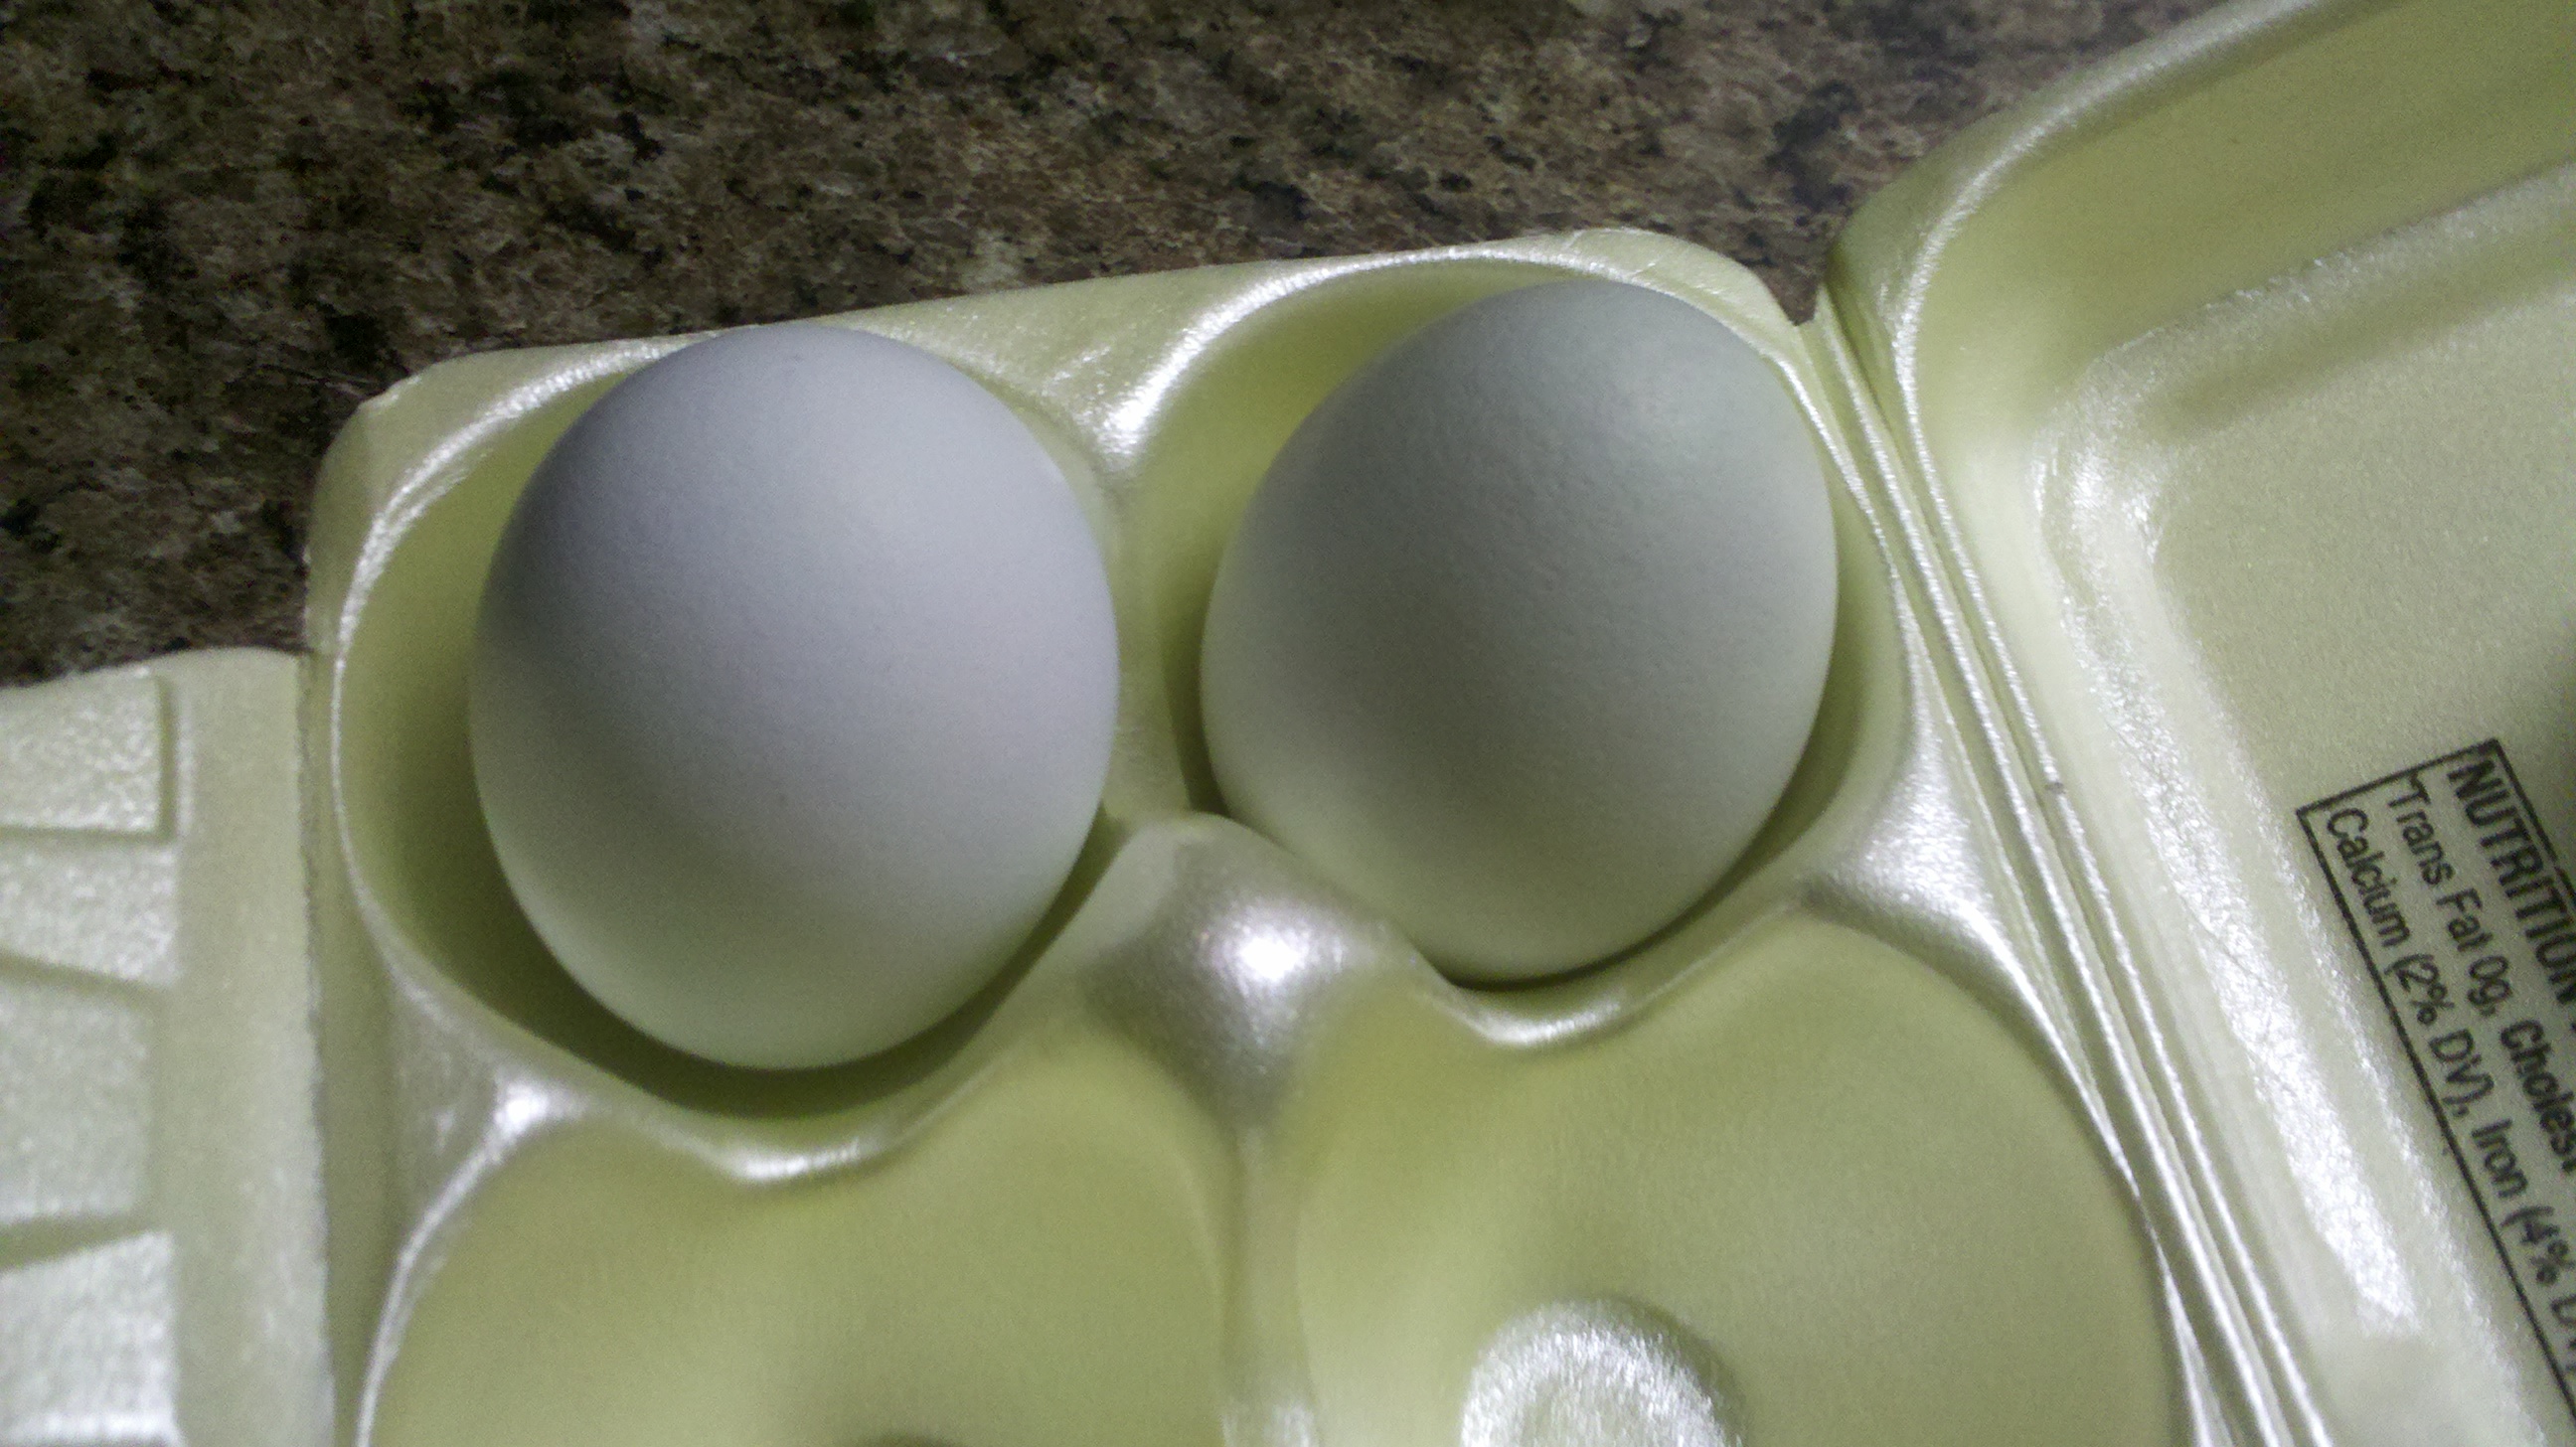 My first eggs! 6/11/12. Two of my EEs, within hours of me bringing them home. (14-15 months old)